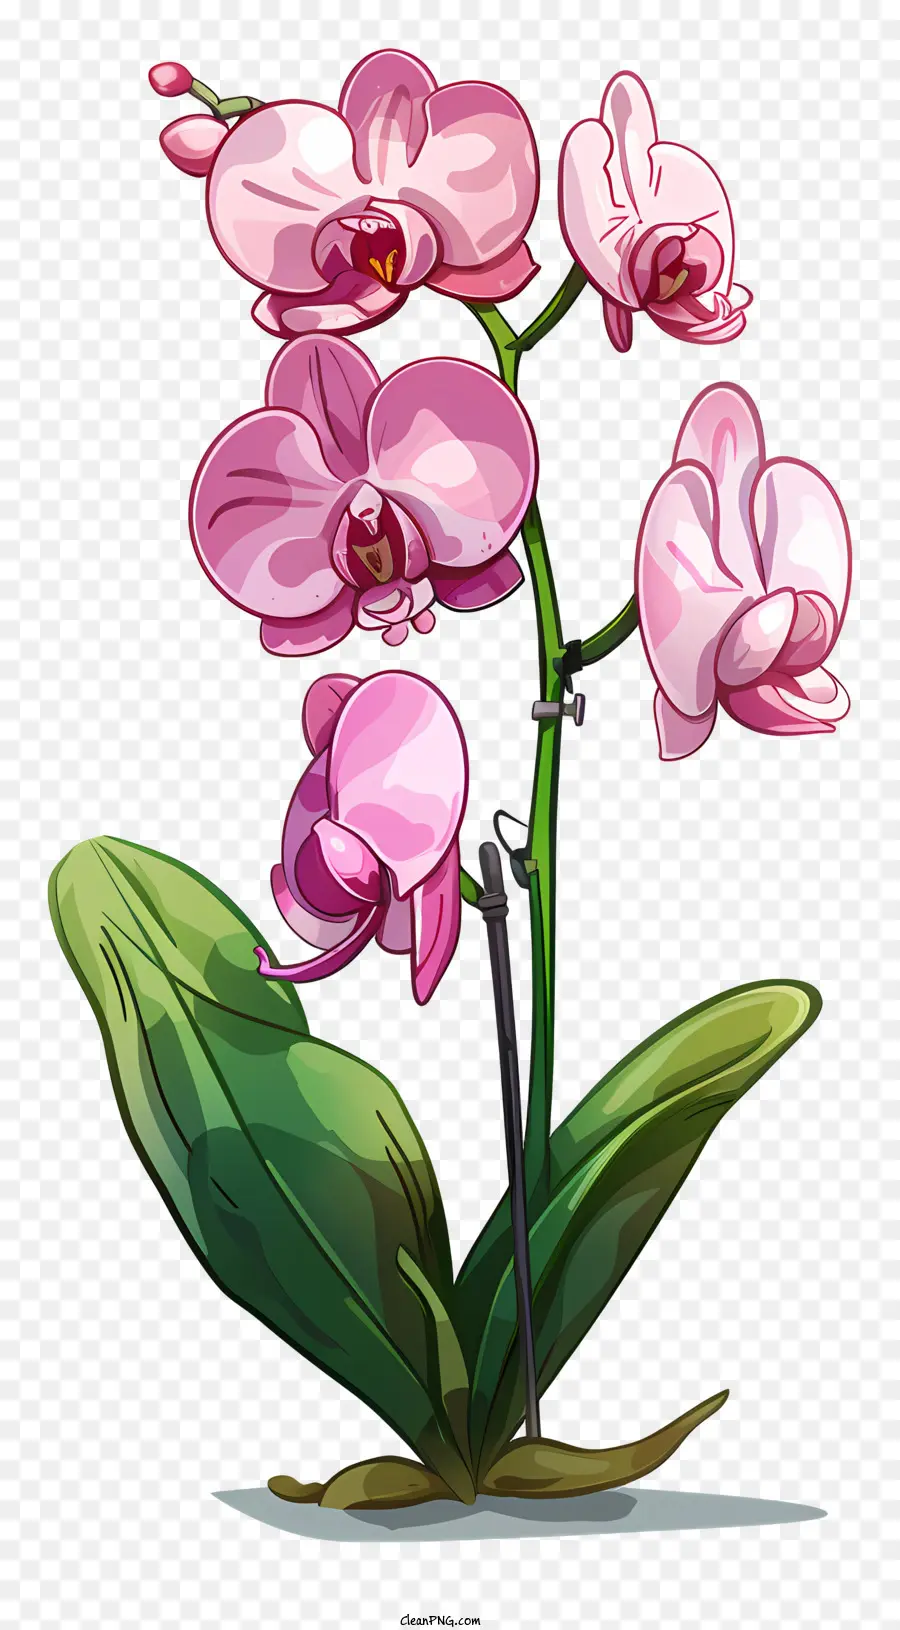 Orchid Day Pink Orchid Flower Orchid Flooms - Orchidea rosa con petali scuri, centro bianco